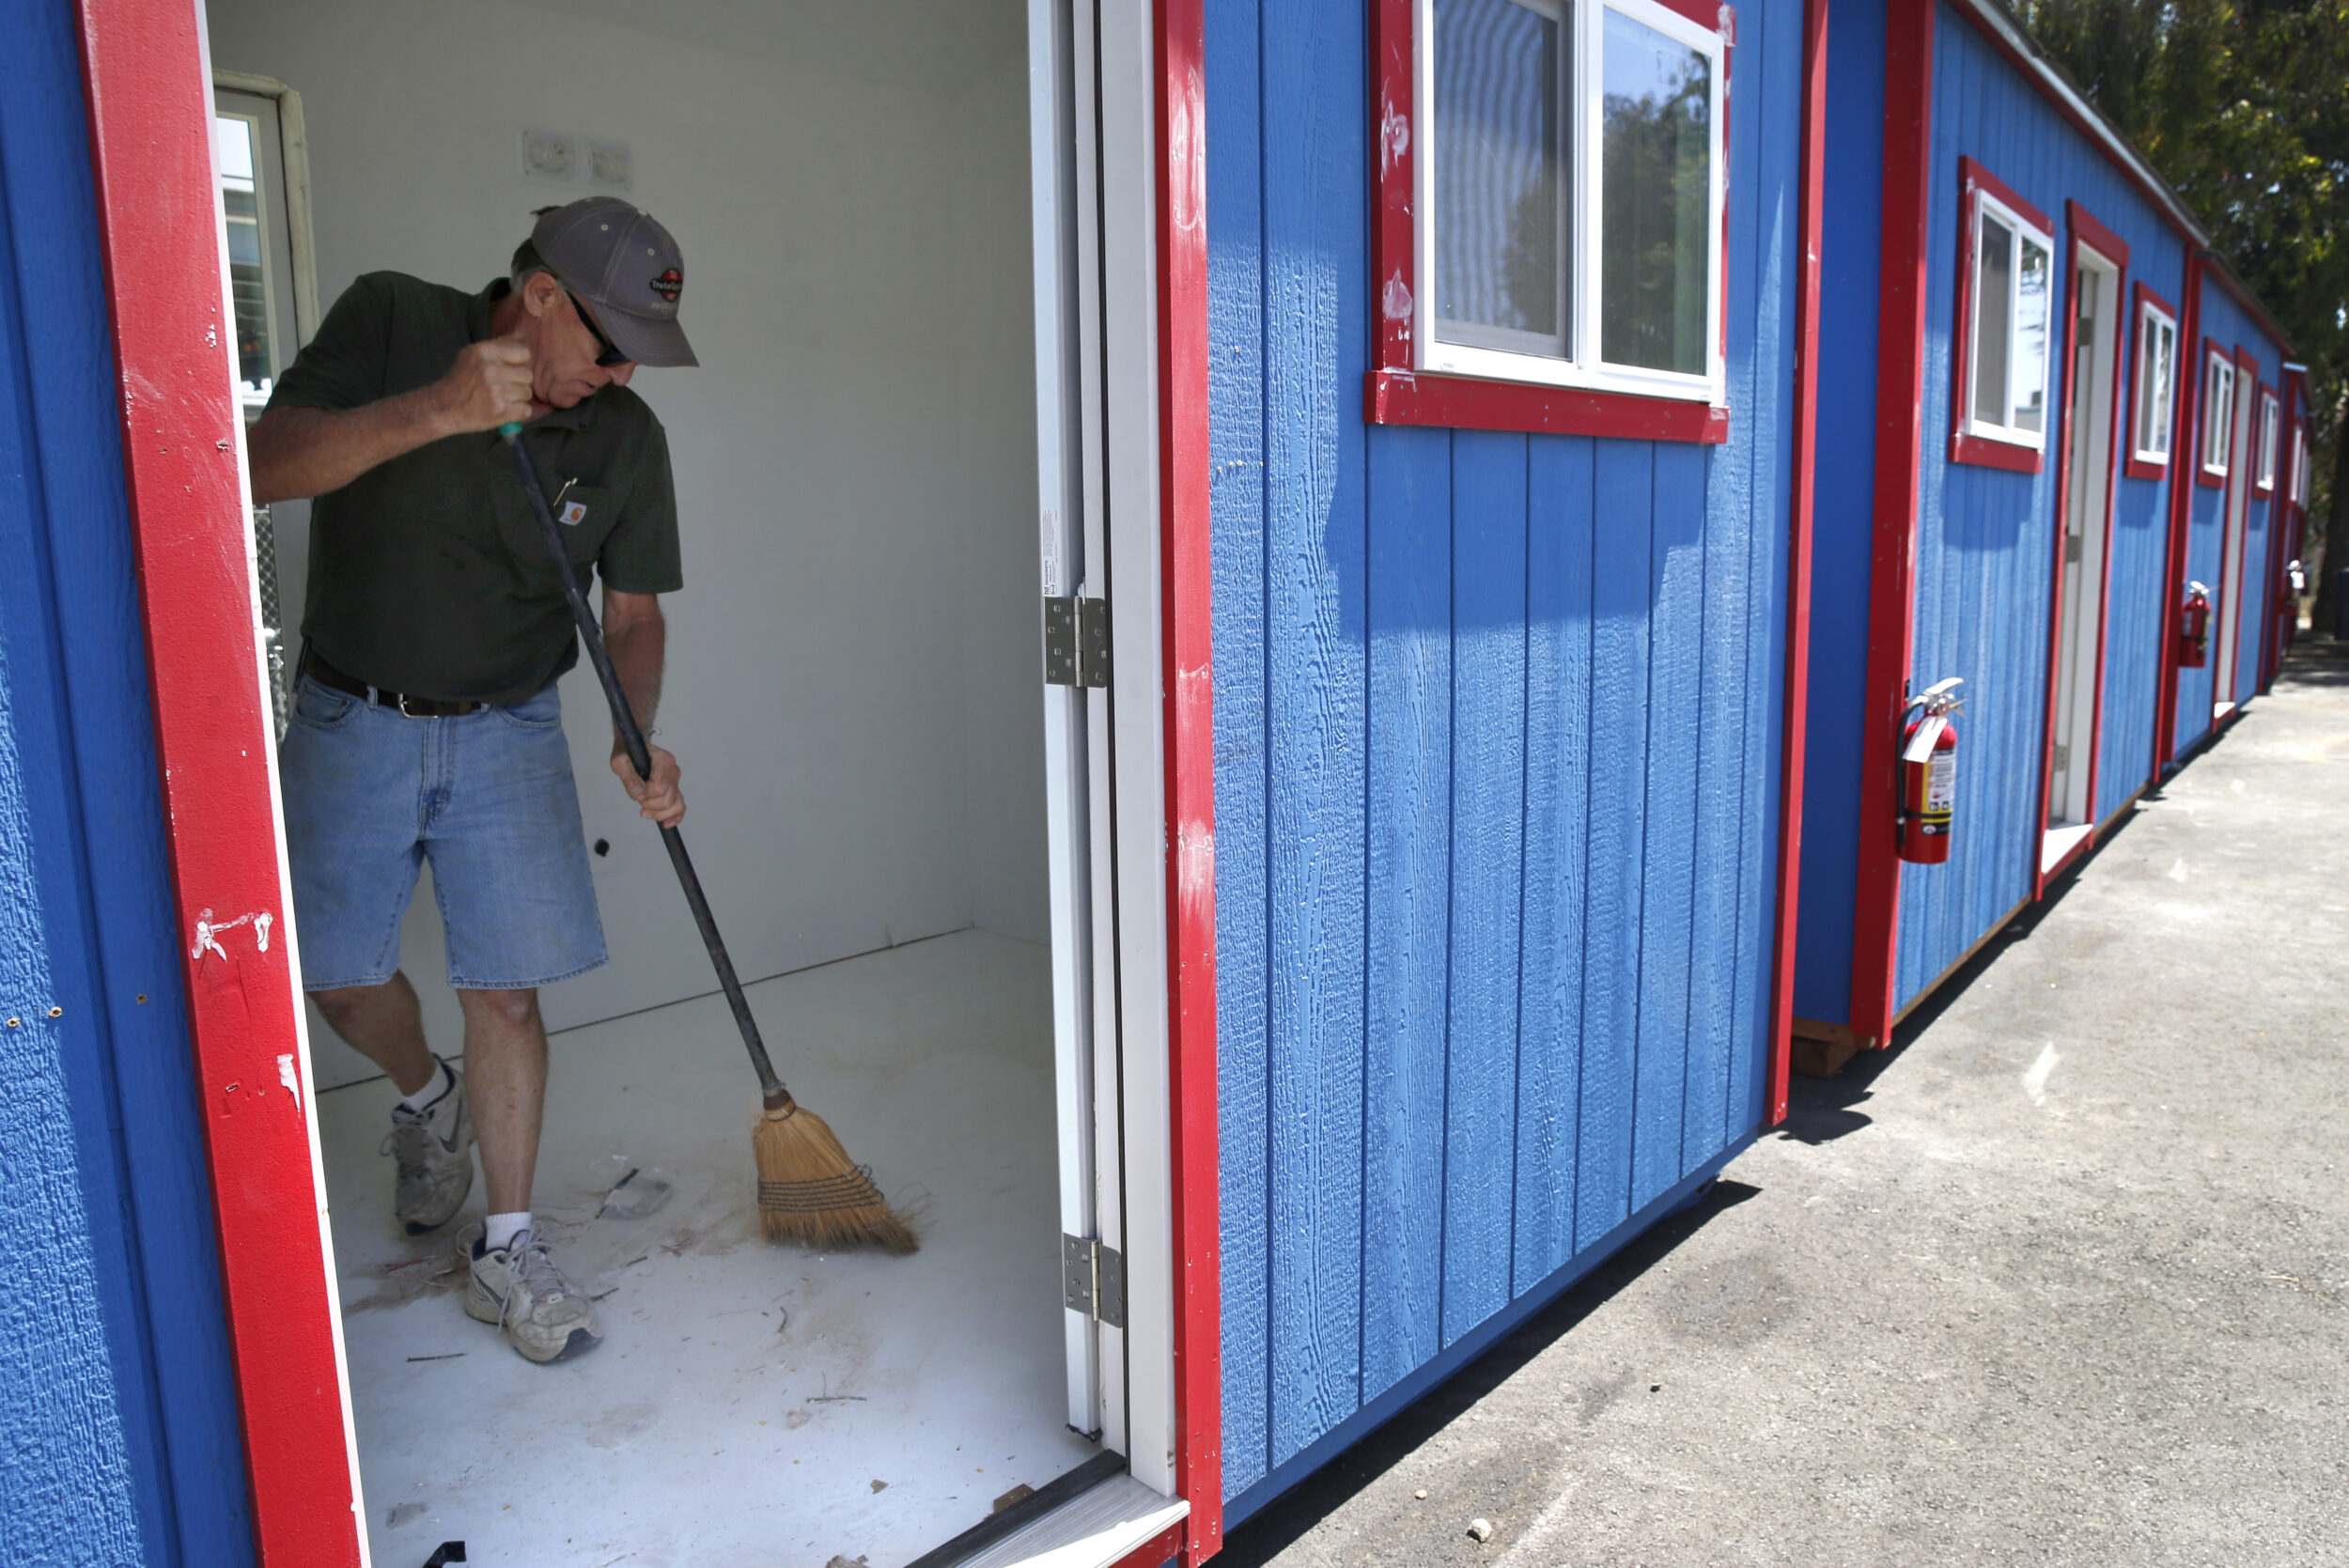 A person cleans a shelter's floor with a broom.